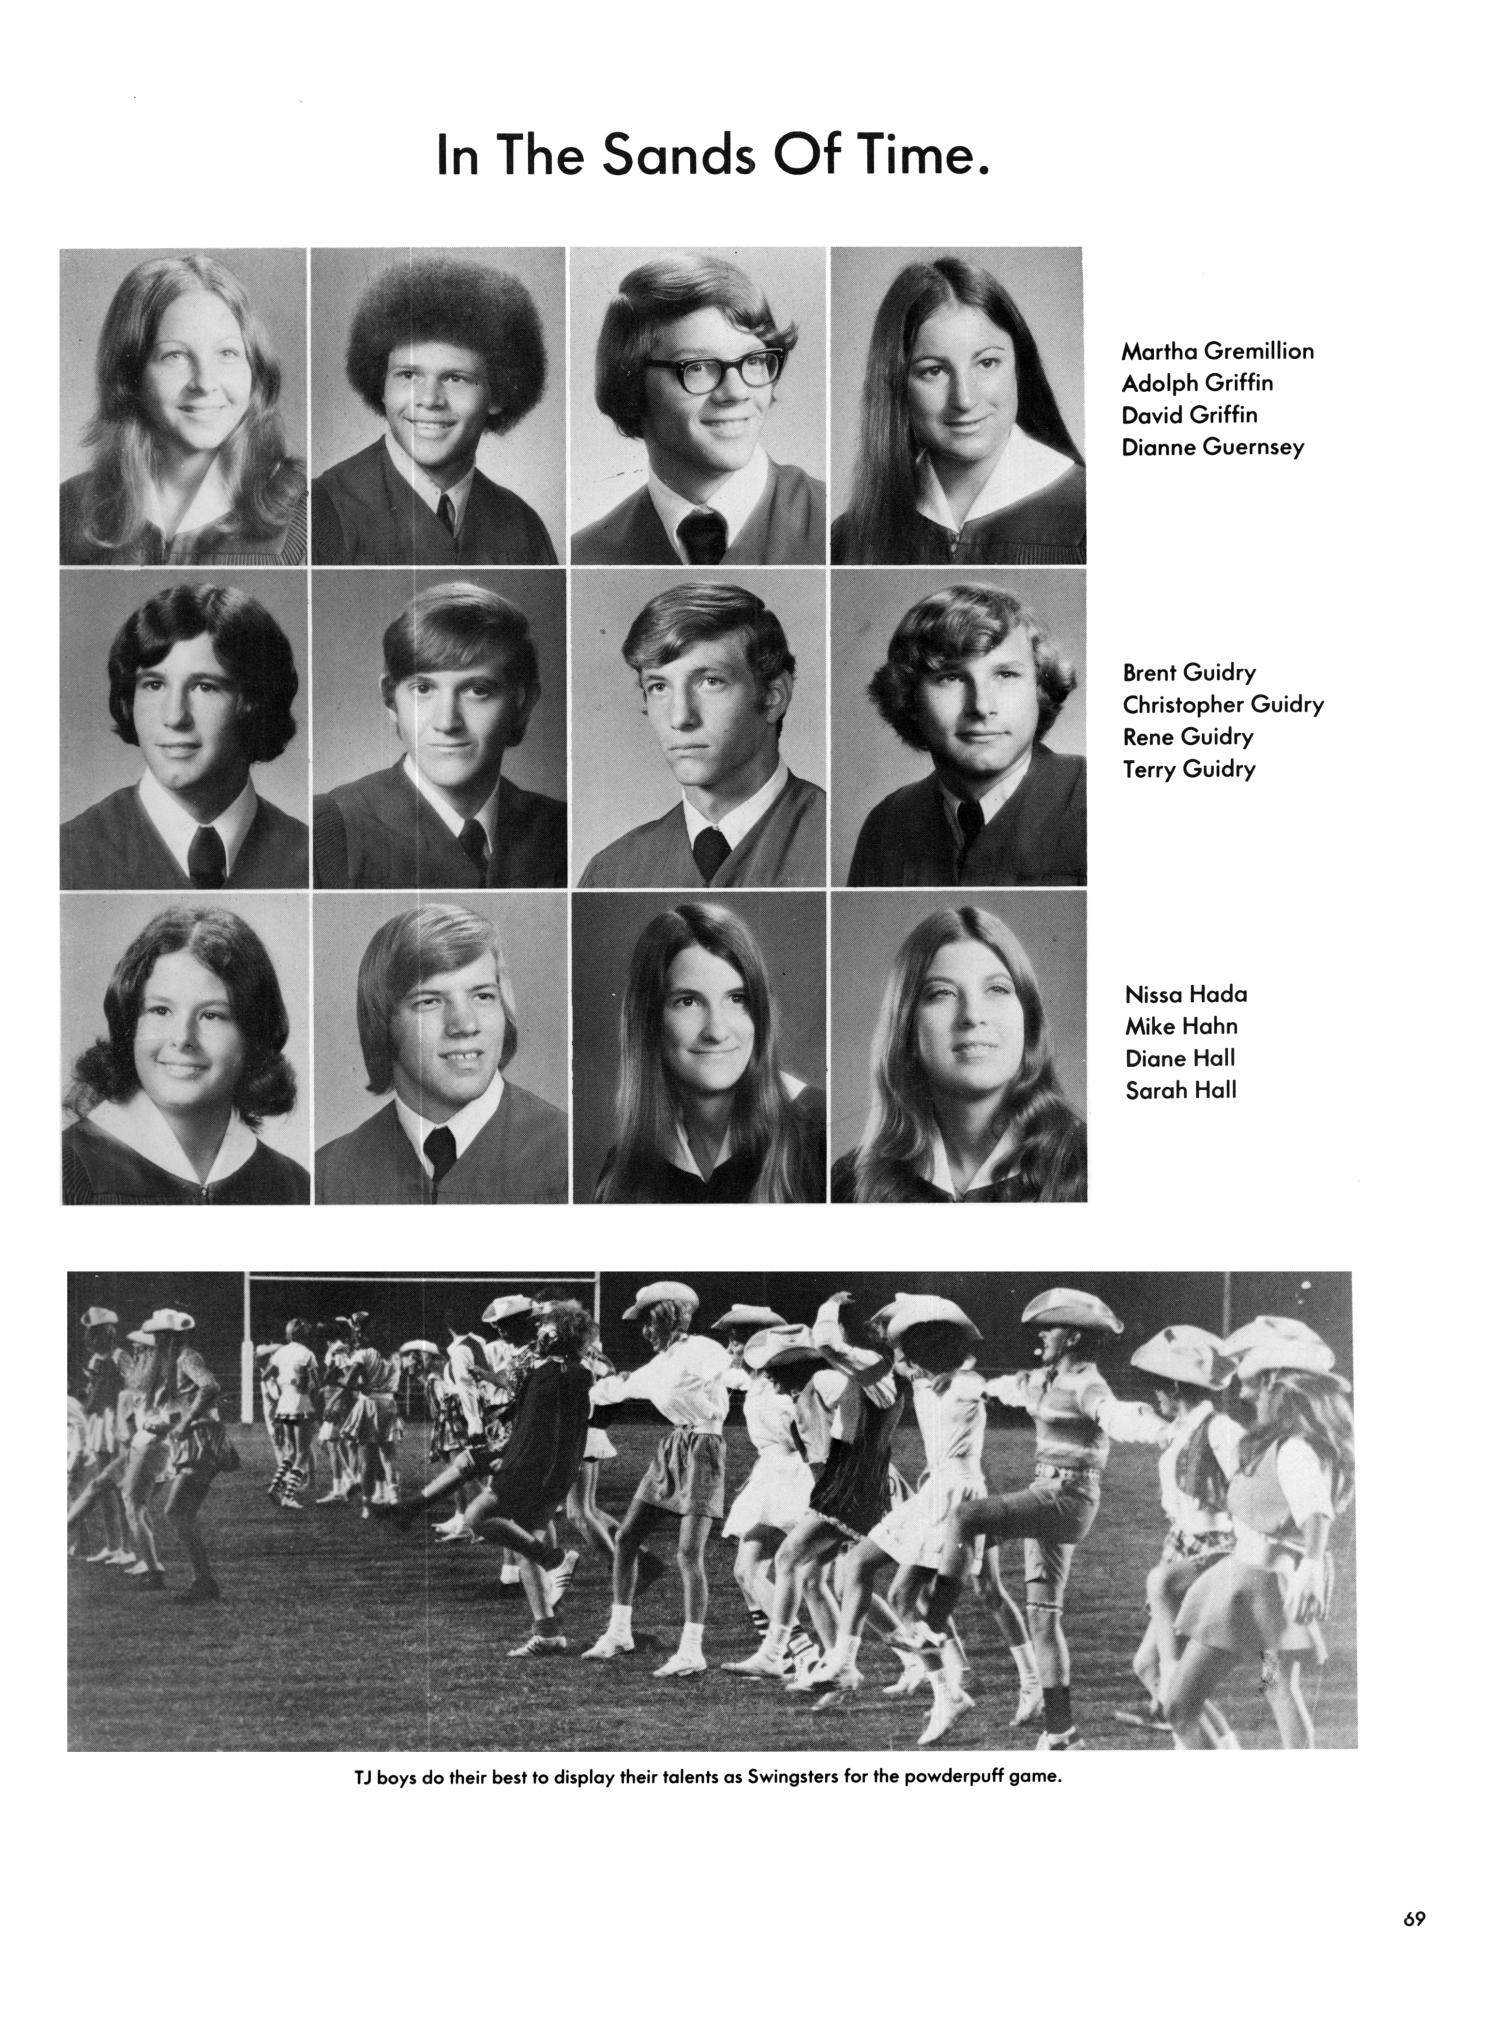 The Yellow Jacket, Yearbook of Thomas Jefferson High School, 1973
                                                
                                                    69
                                                